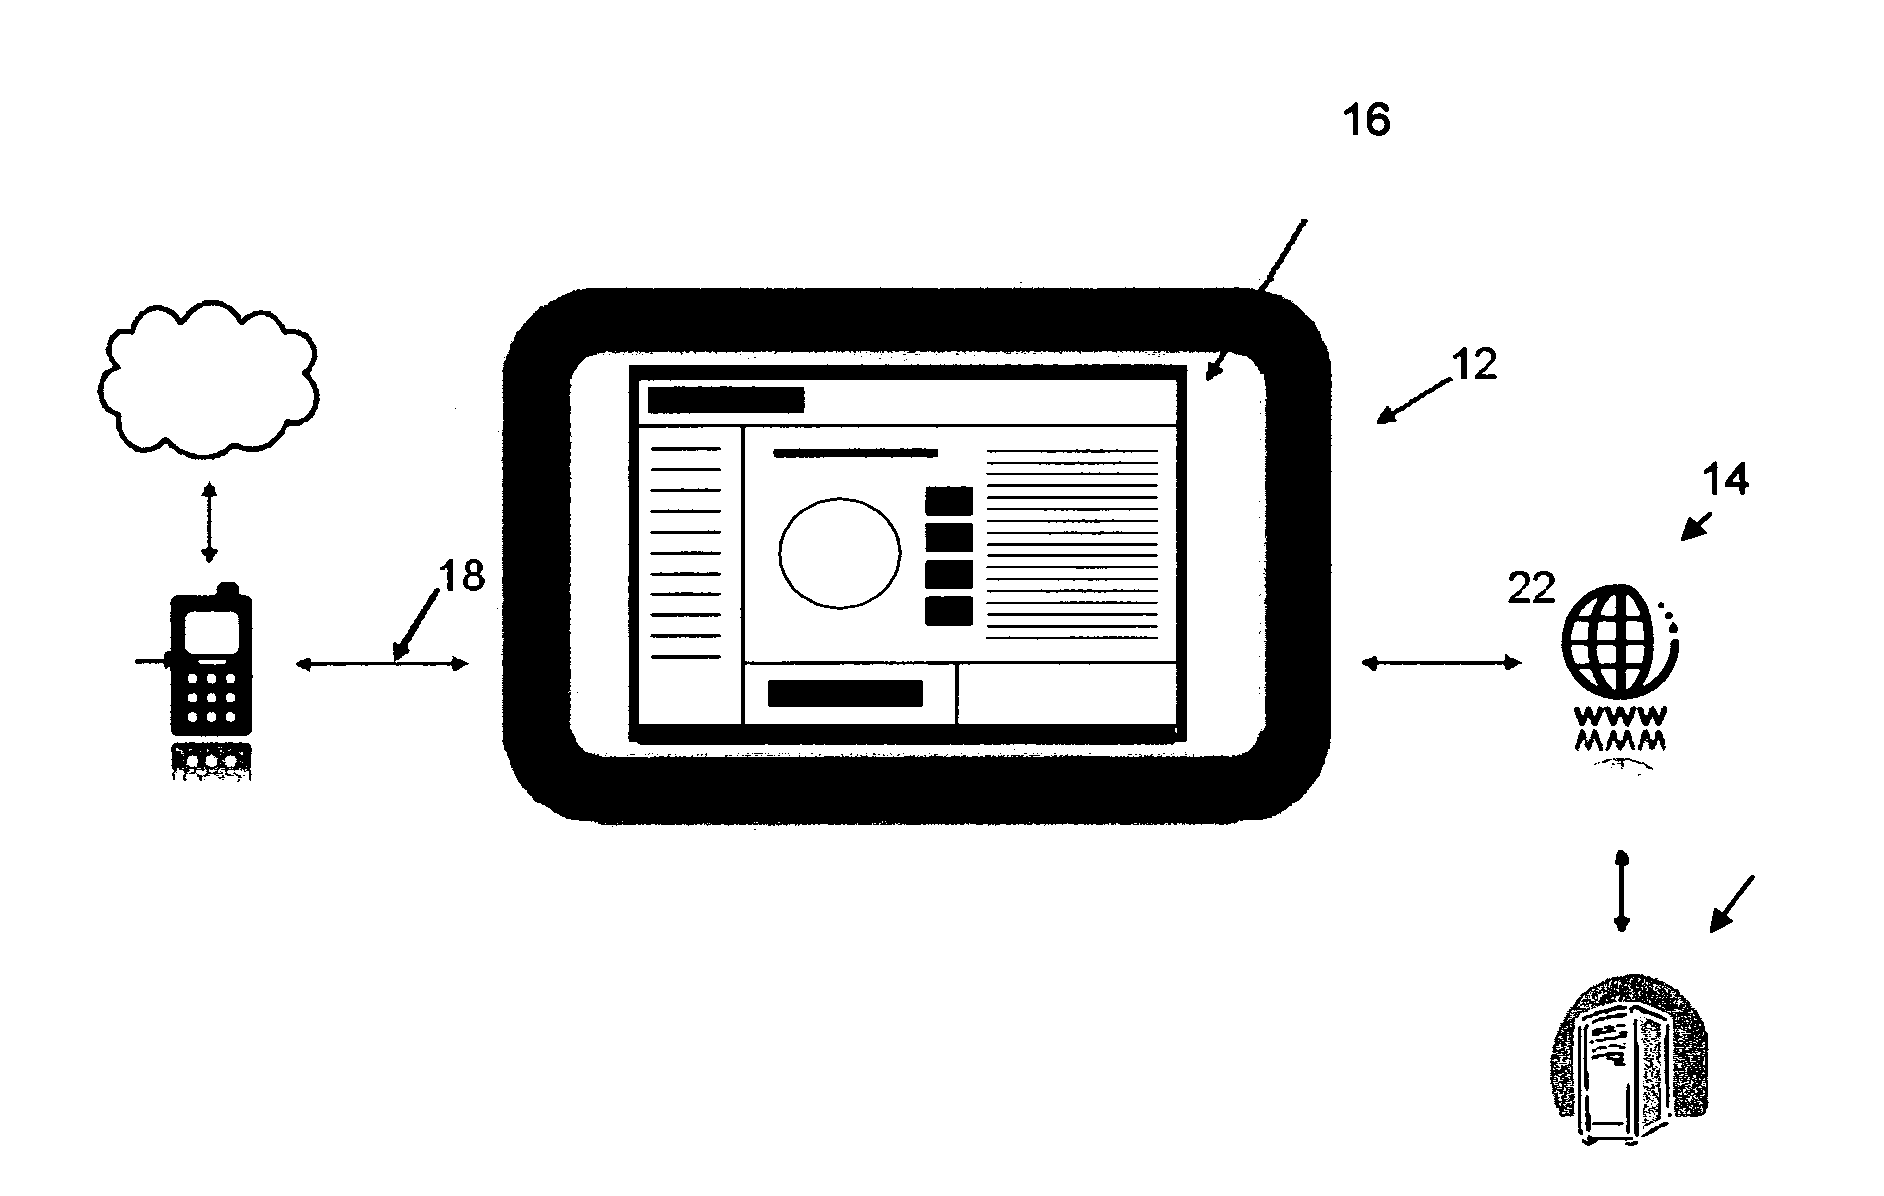 Method of loading software in mobile and desktop environments